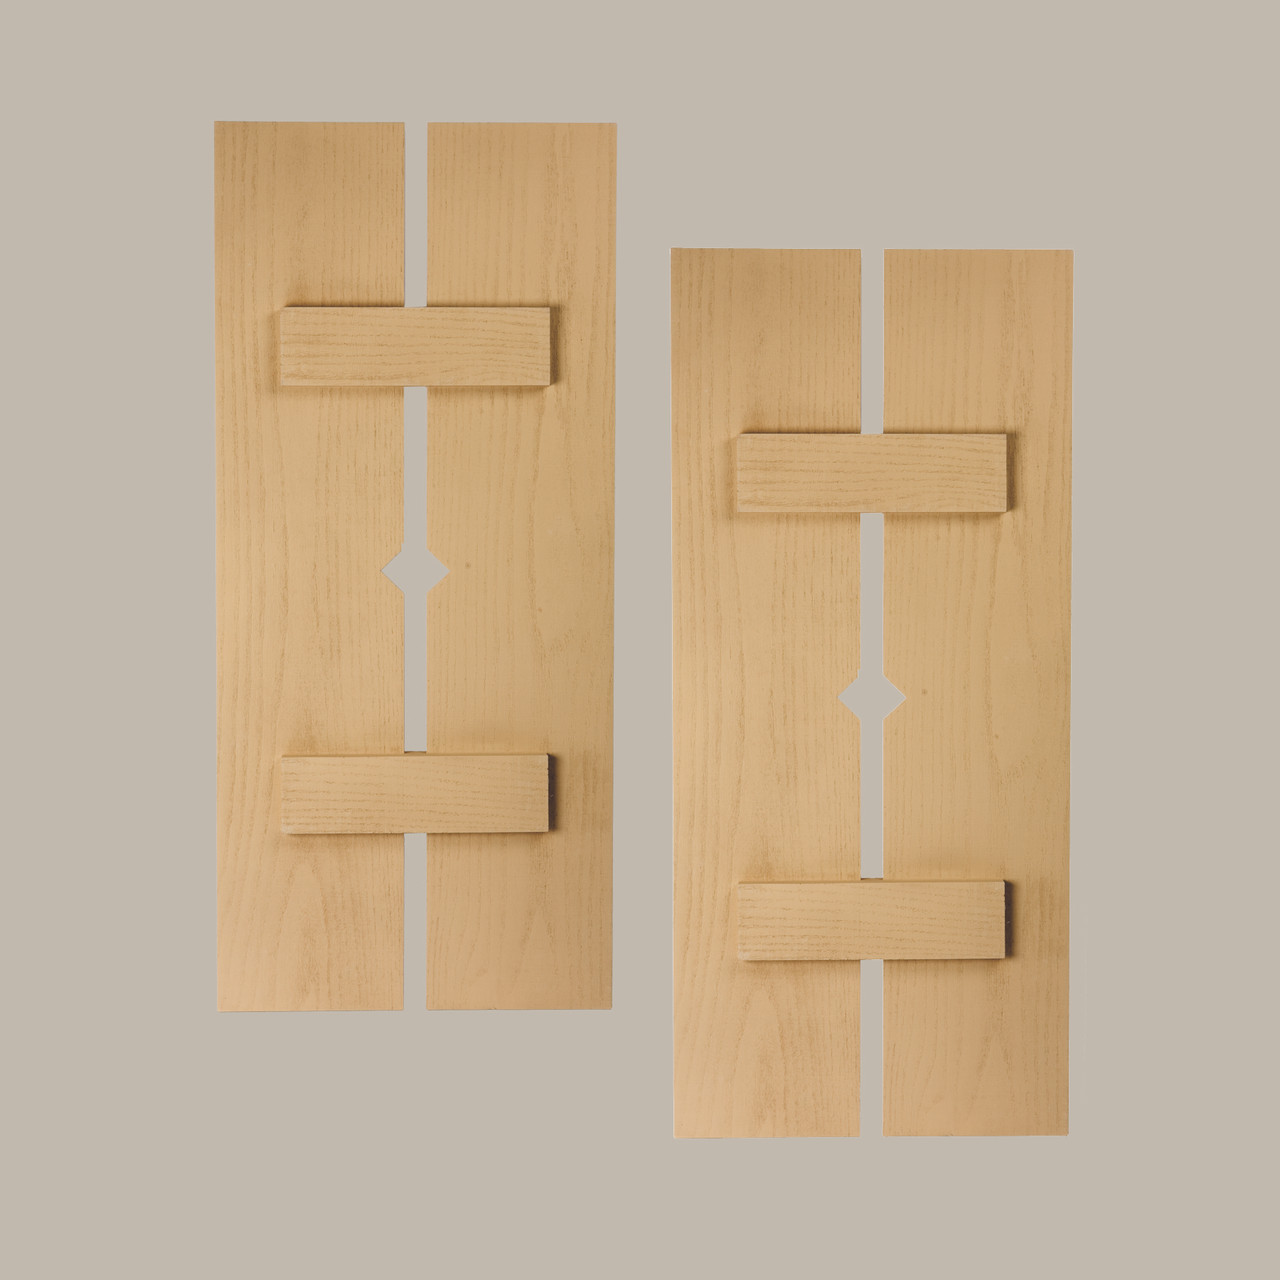 12 inch by 118 inch Plank Shutter with 2-Plank, Diamond